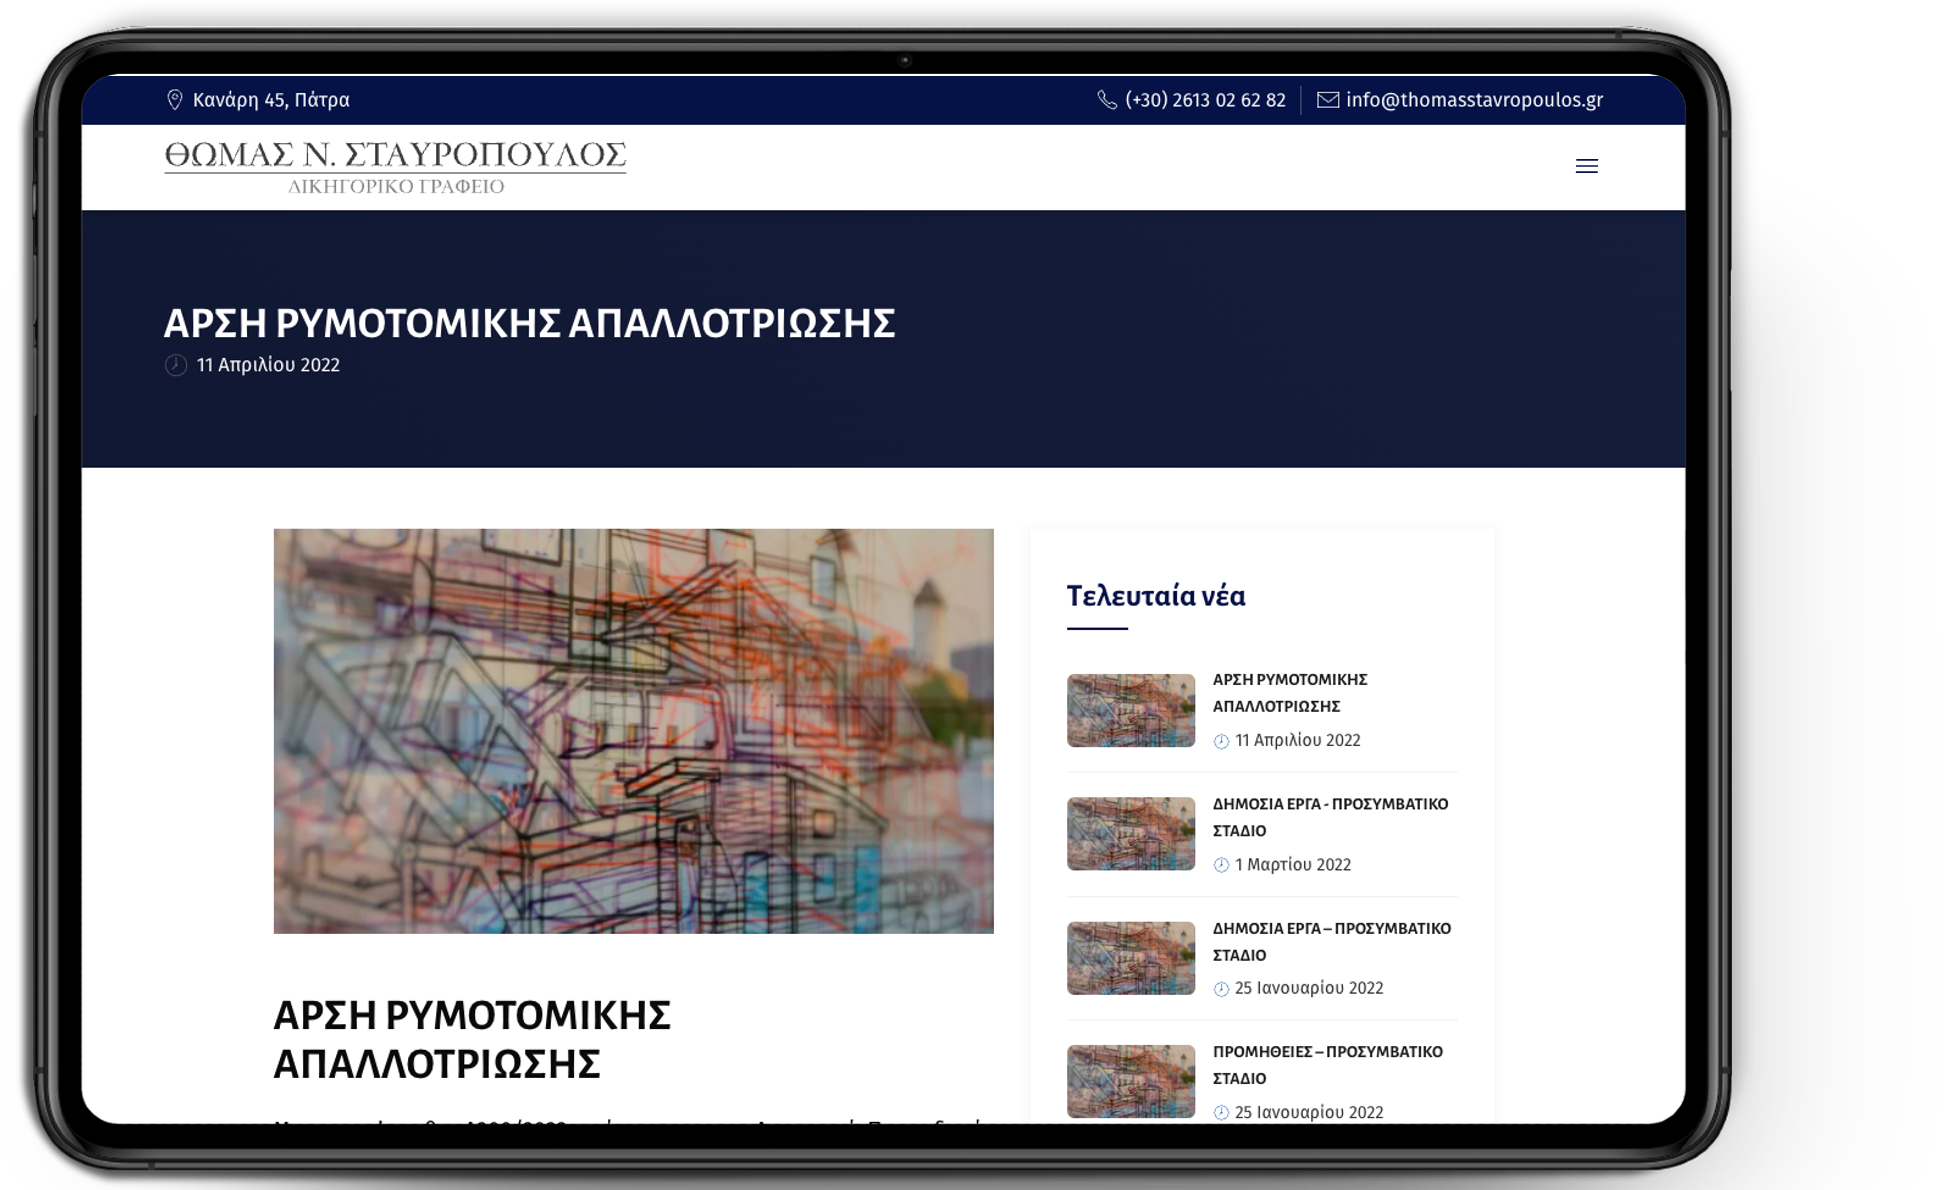 Tablet web design of Thomas Stavropoulos website